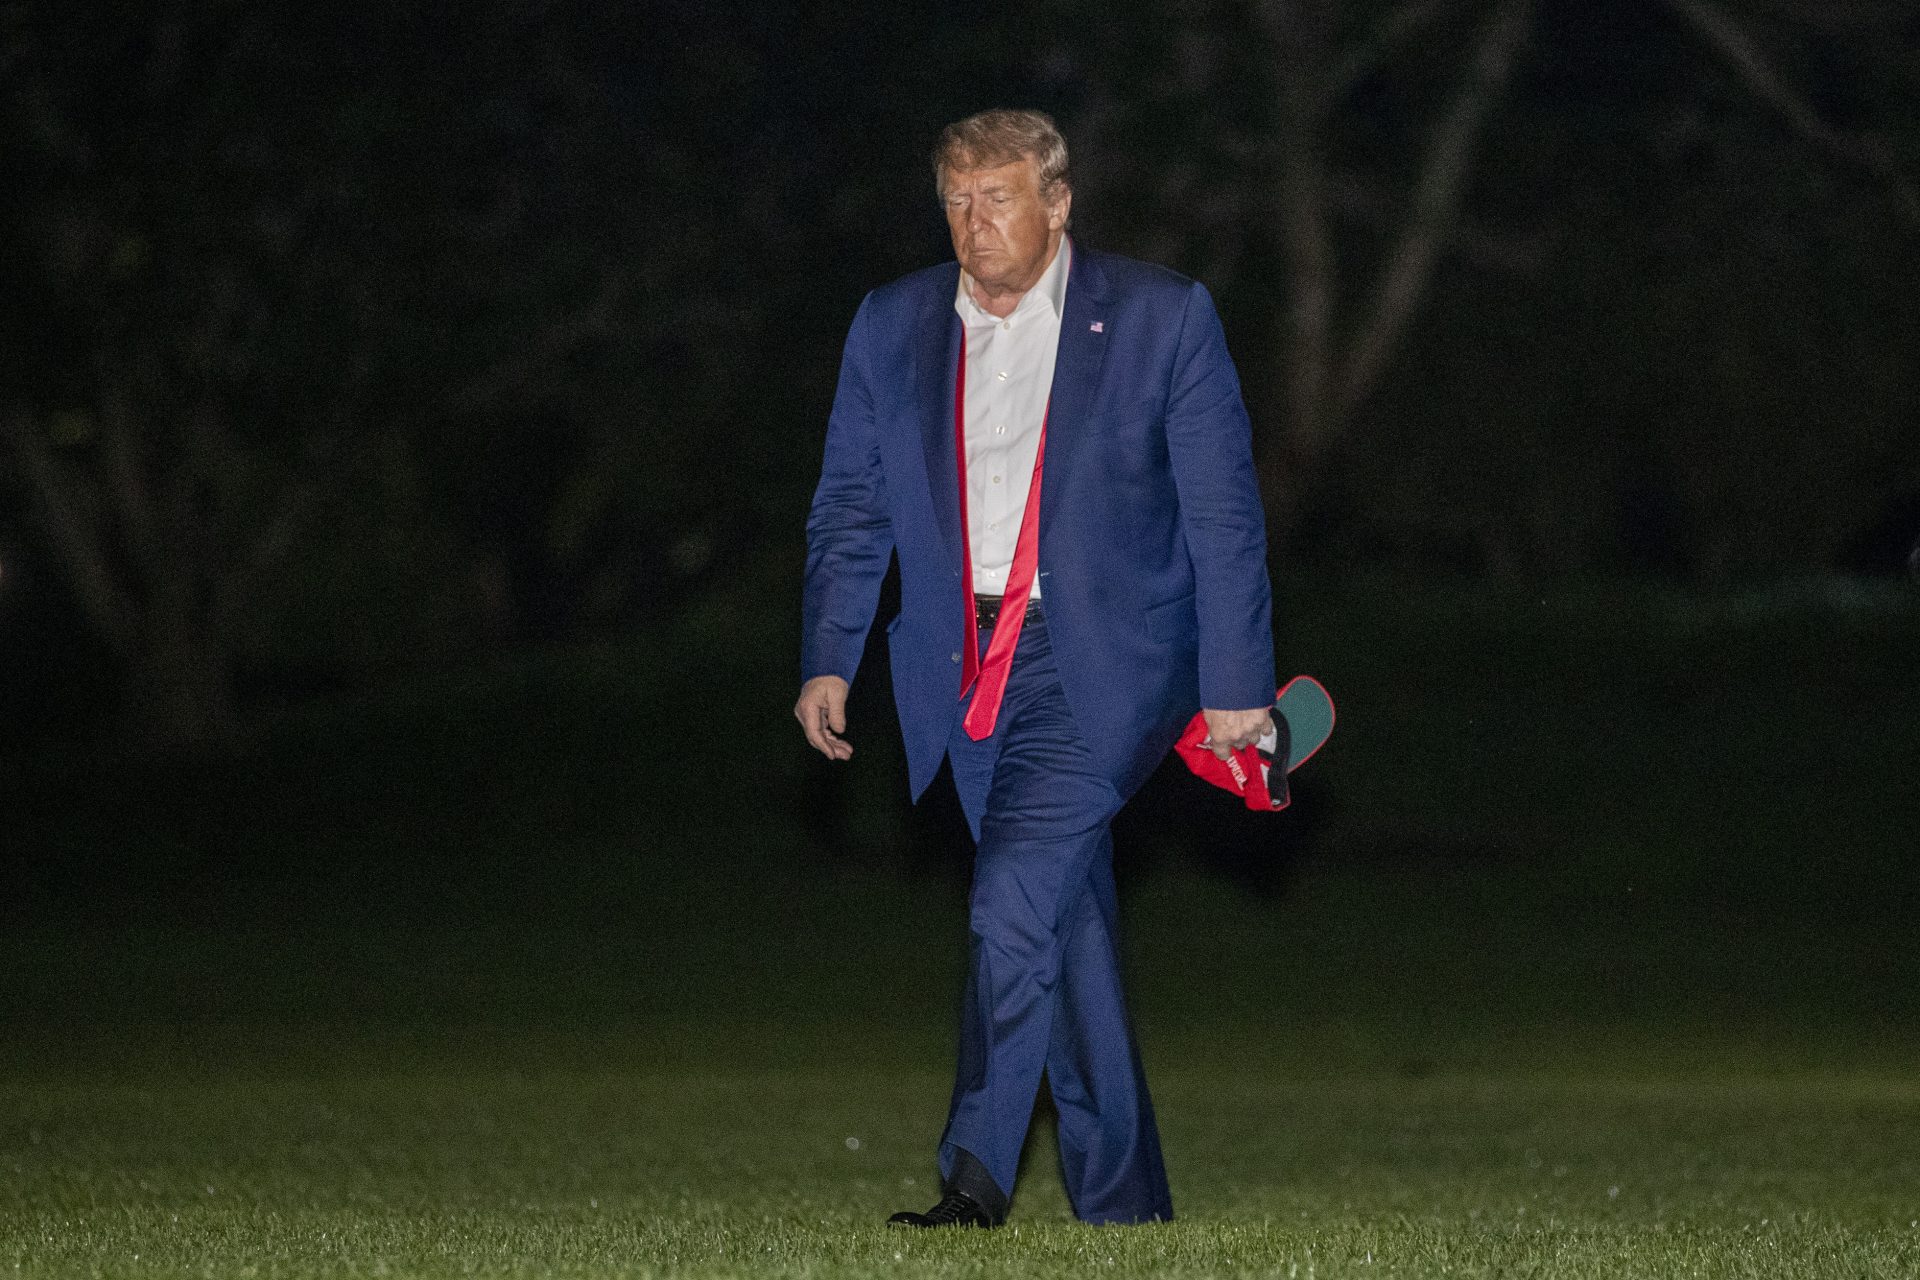 President Donald Trump walks on the South Lawn of the White House in Washington, early Sunday, June 21, 2020, after stepping off Marine One as he returns from a campaign rally in Tulsa, Okla.